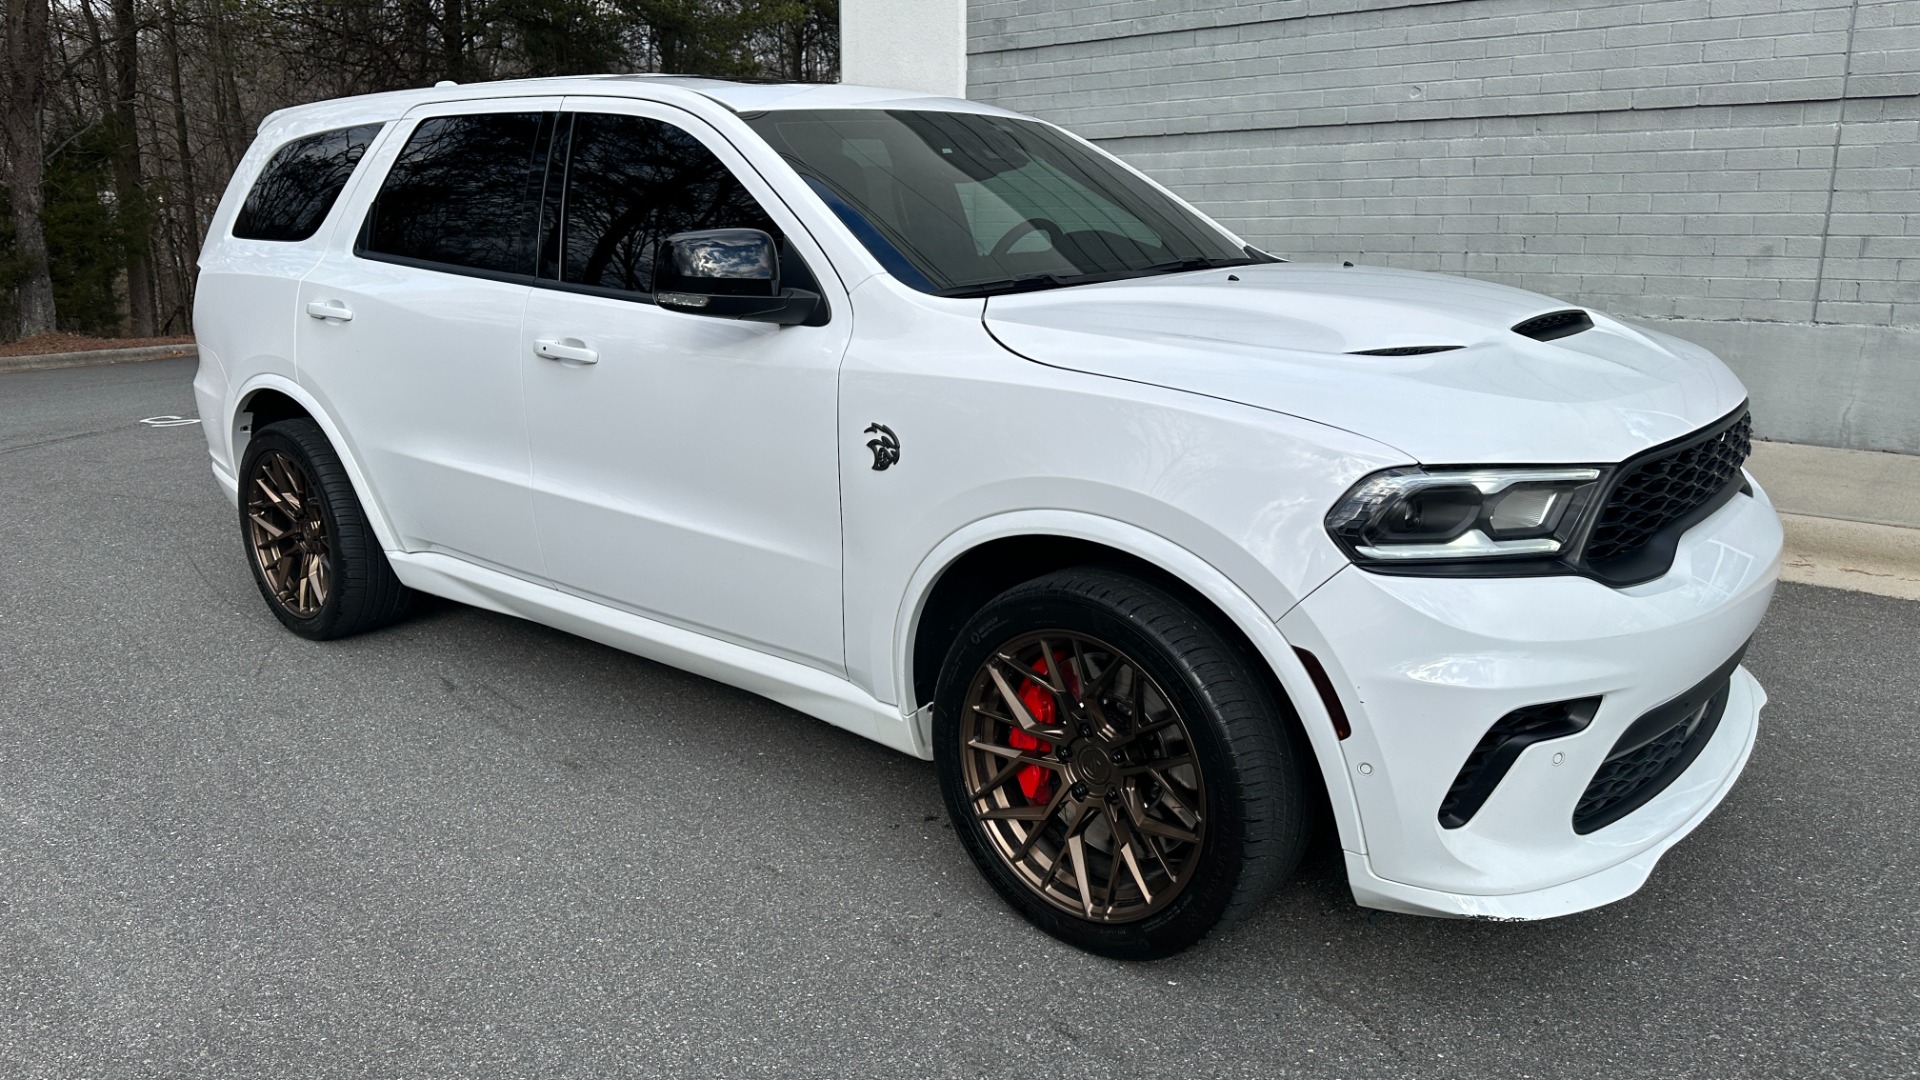 Used 2021 Dodge Durango SRT HELLCAT / LEGMAKER INTAKE / VARIANT WHEELS / EXHAUST for sale $74,950 at Formula Imports in Charlotte NC 28227 2